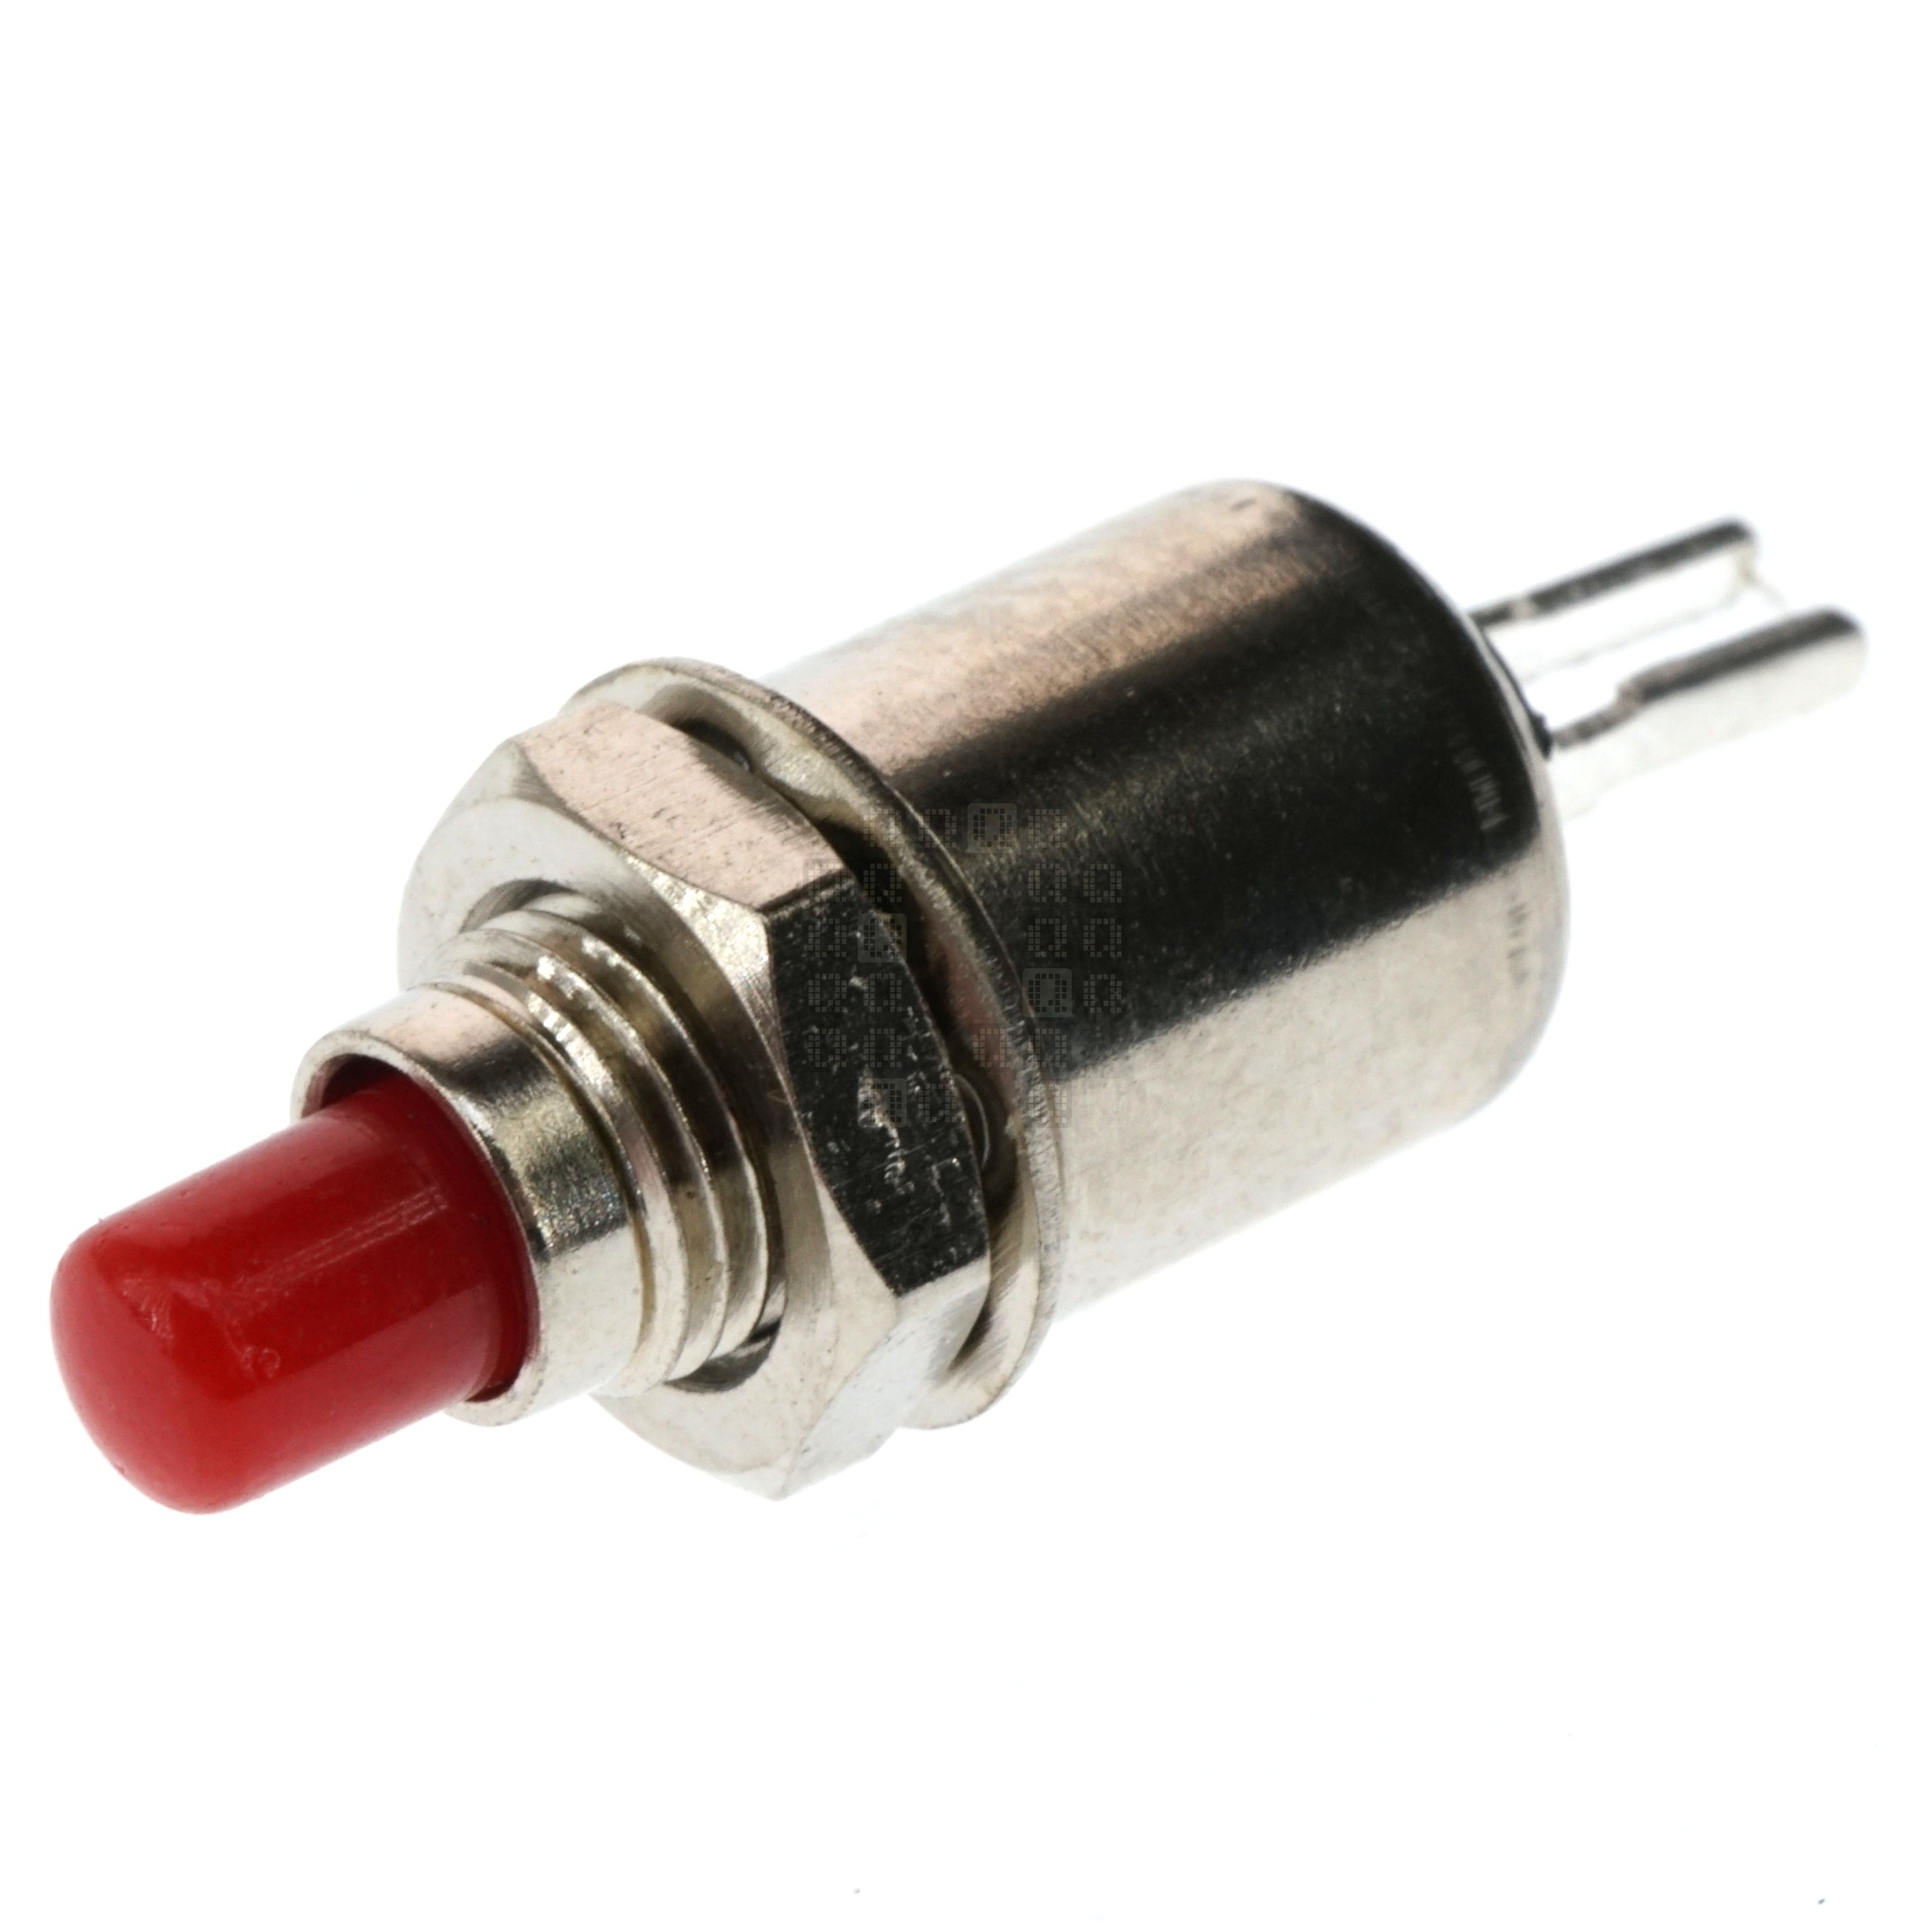 5mm Red Momentary Round Push Button, DS-402, SPST